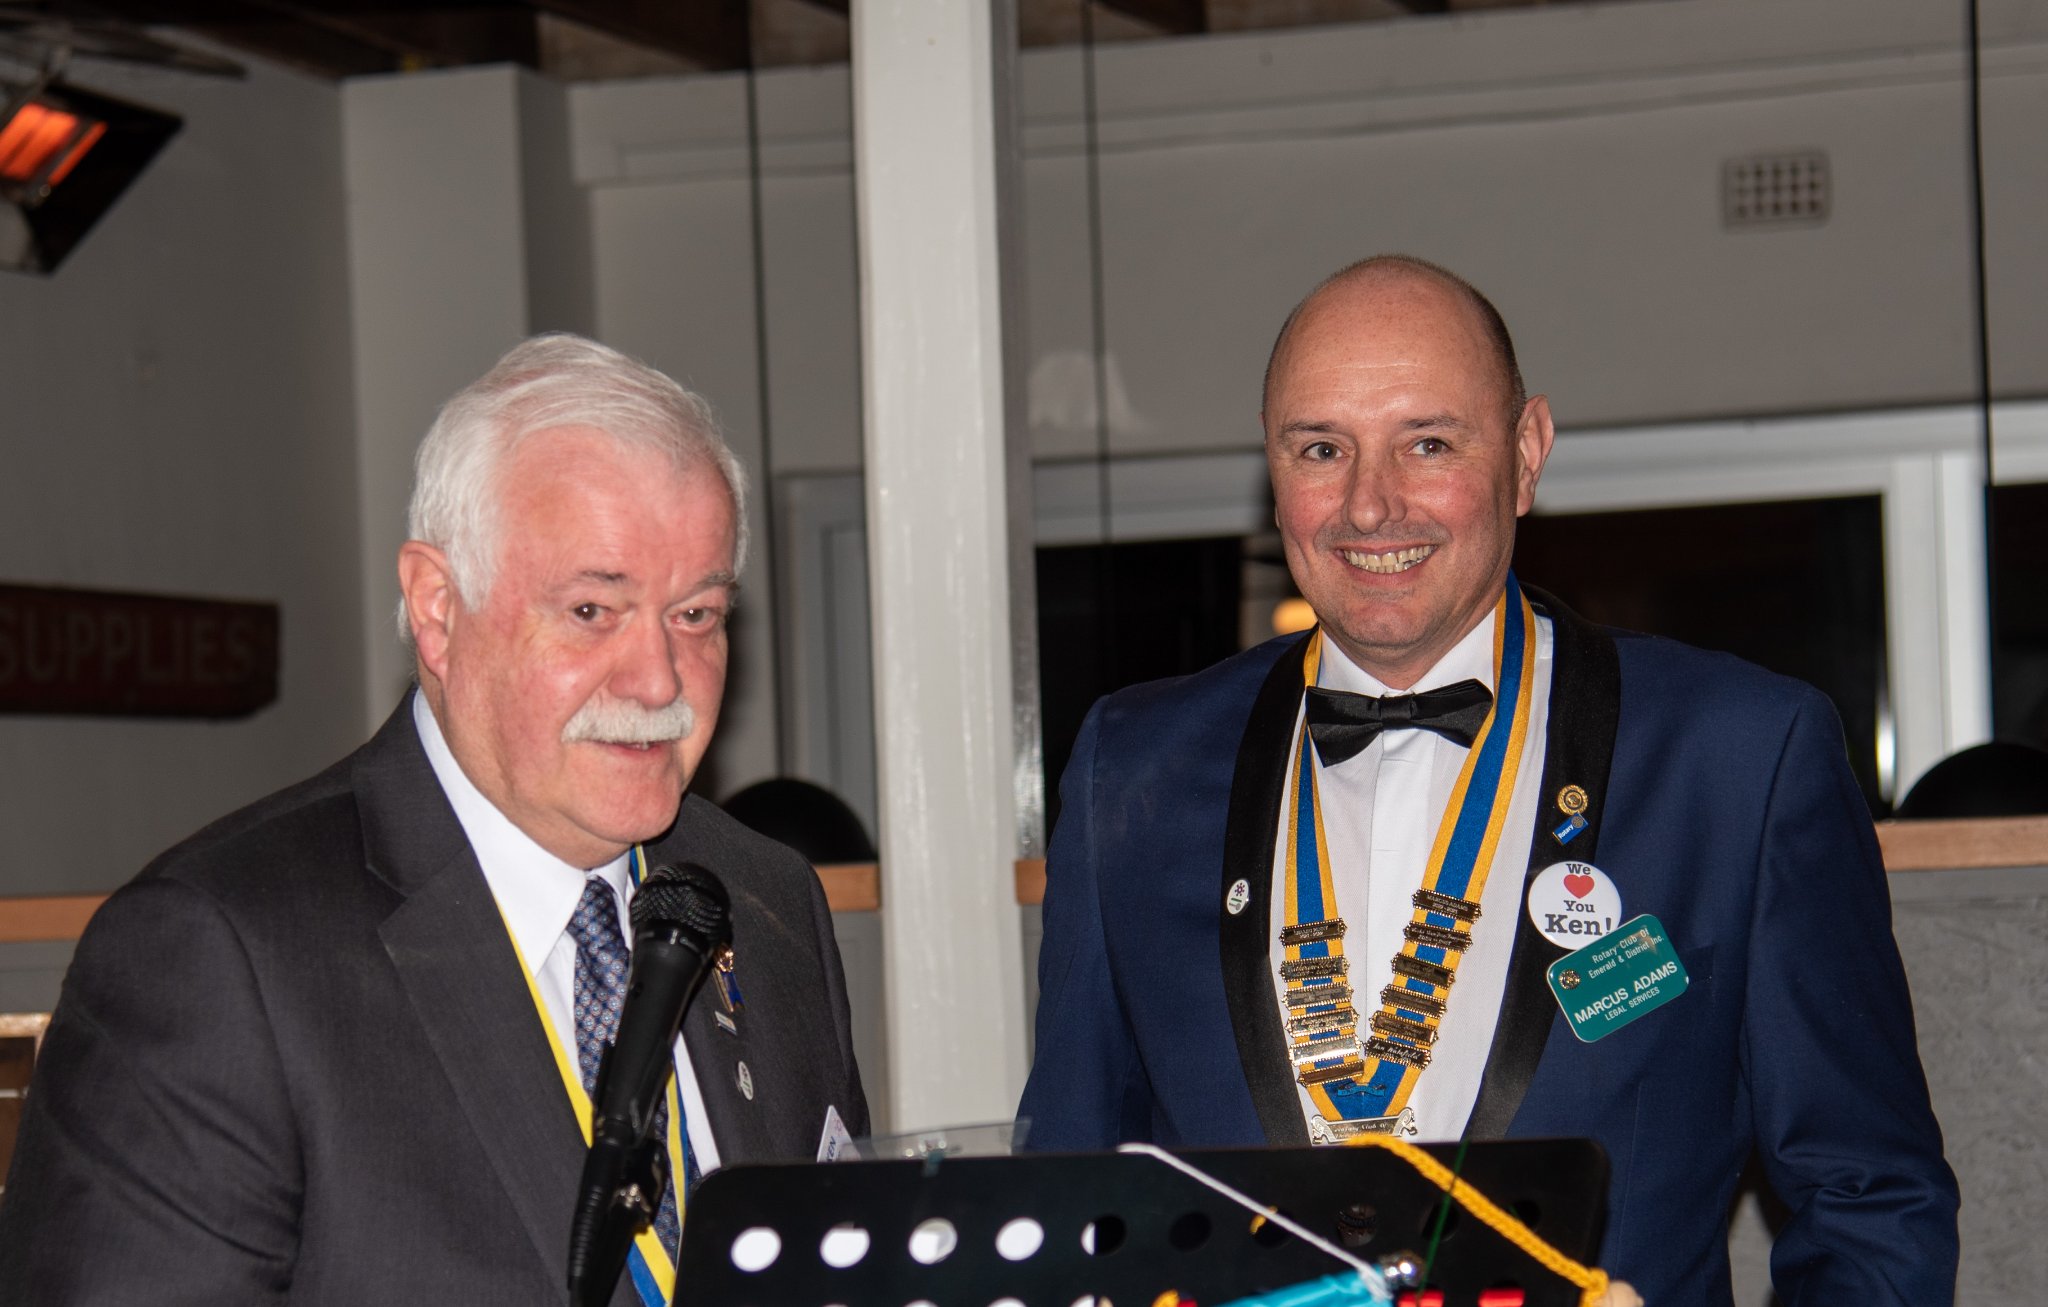 Marcus Adams appointed as the 2022-23 President of the Rotary Club of Emerald & District